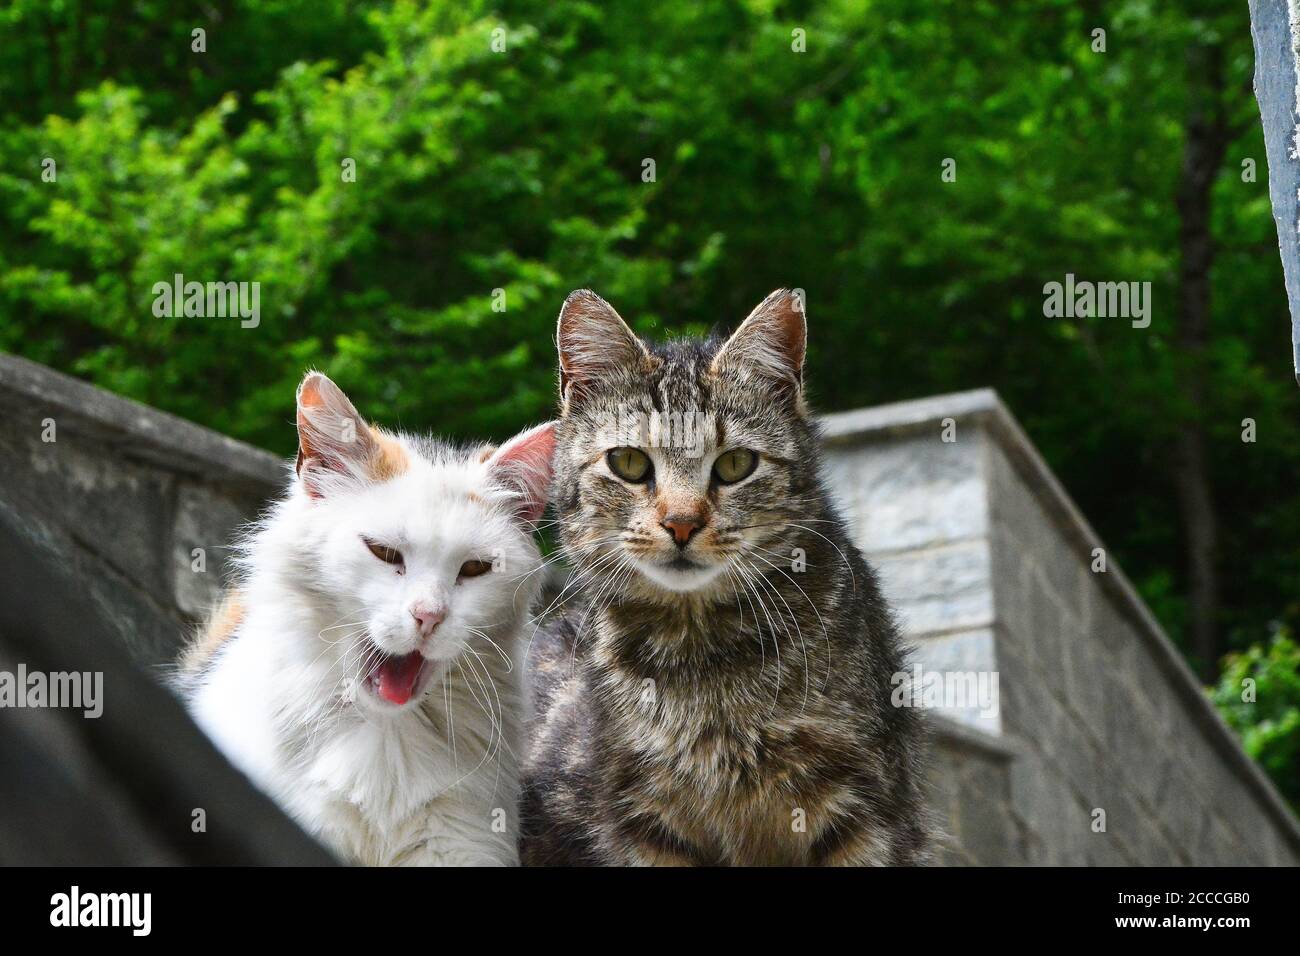 Two European Shorthair cats outside a building. Stock Photo